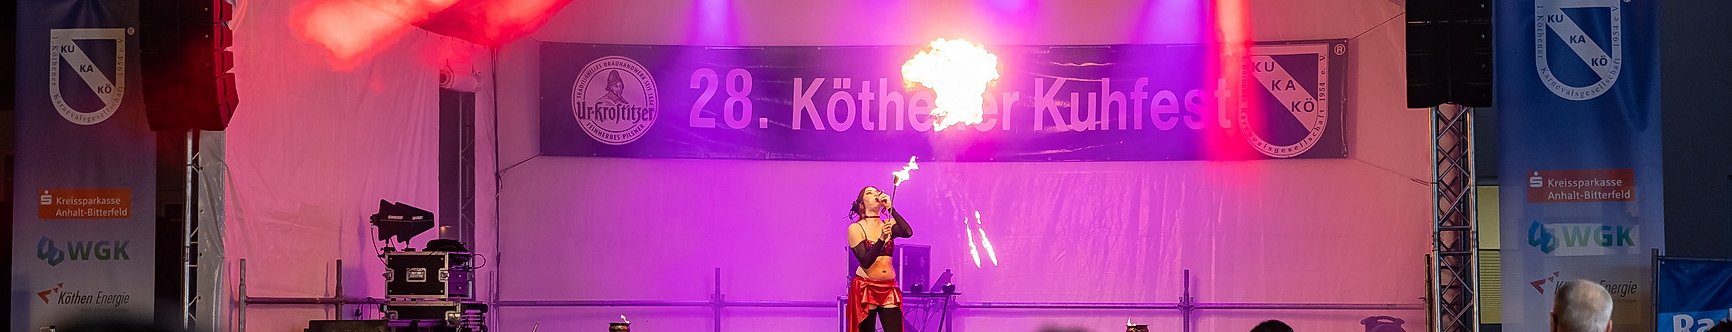 kuhfest fr 21